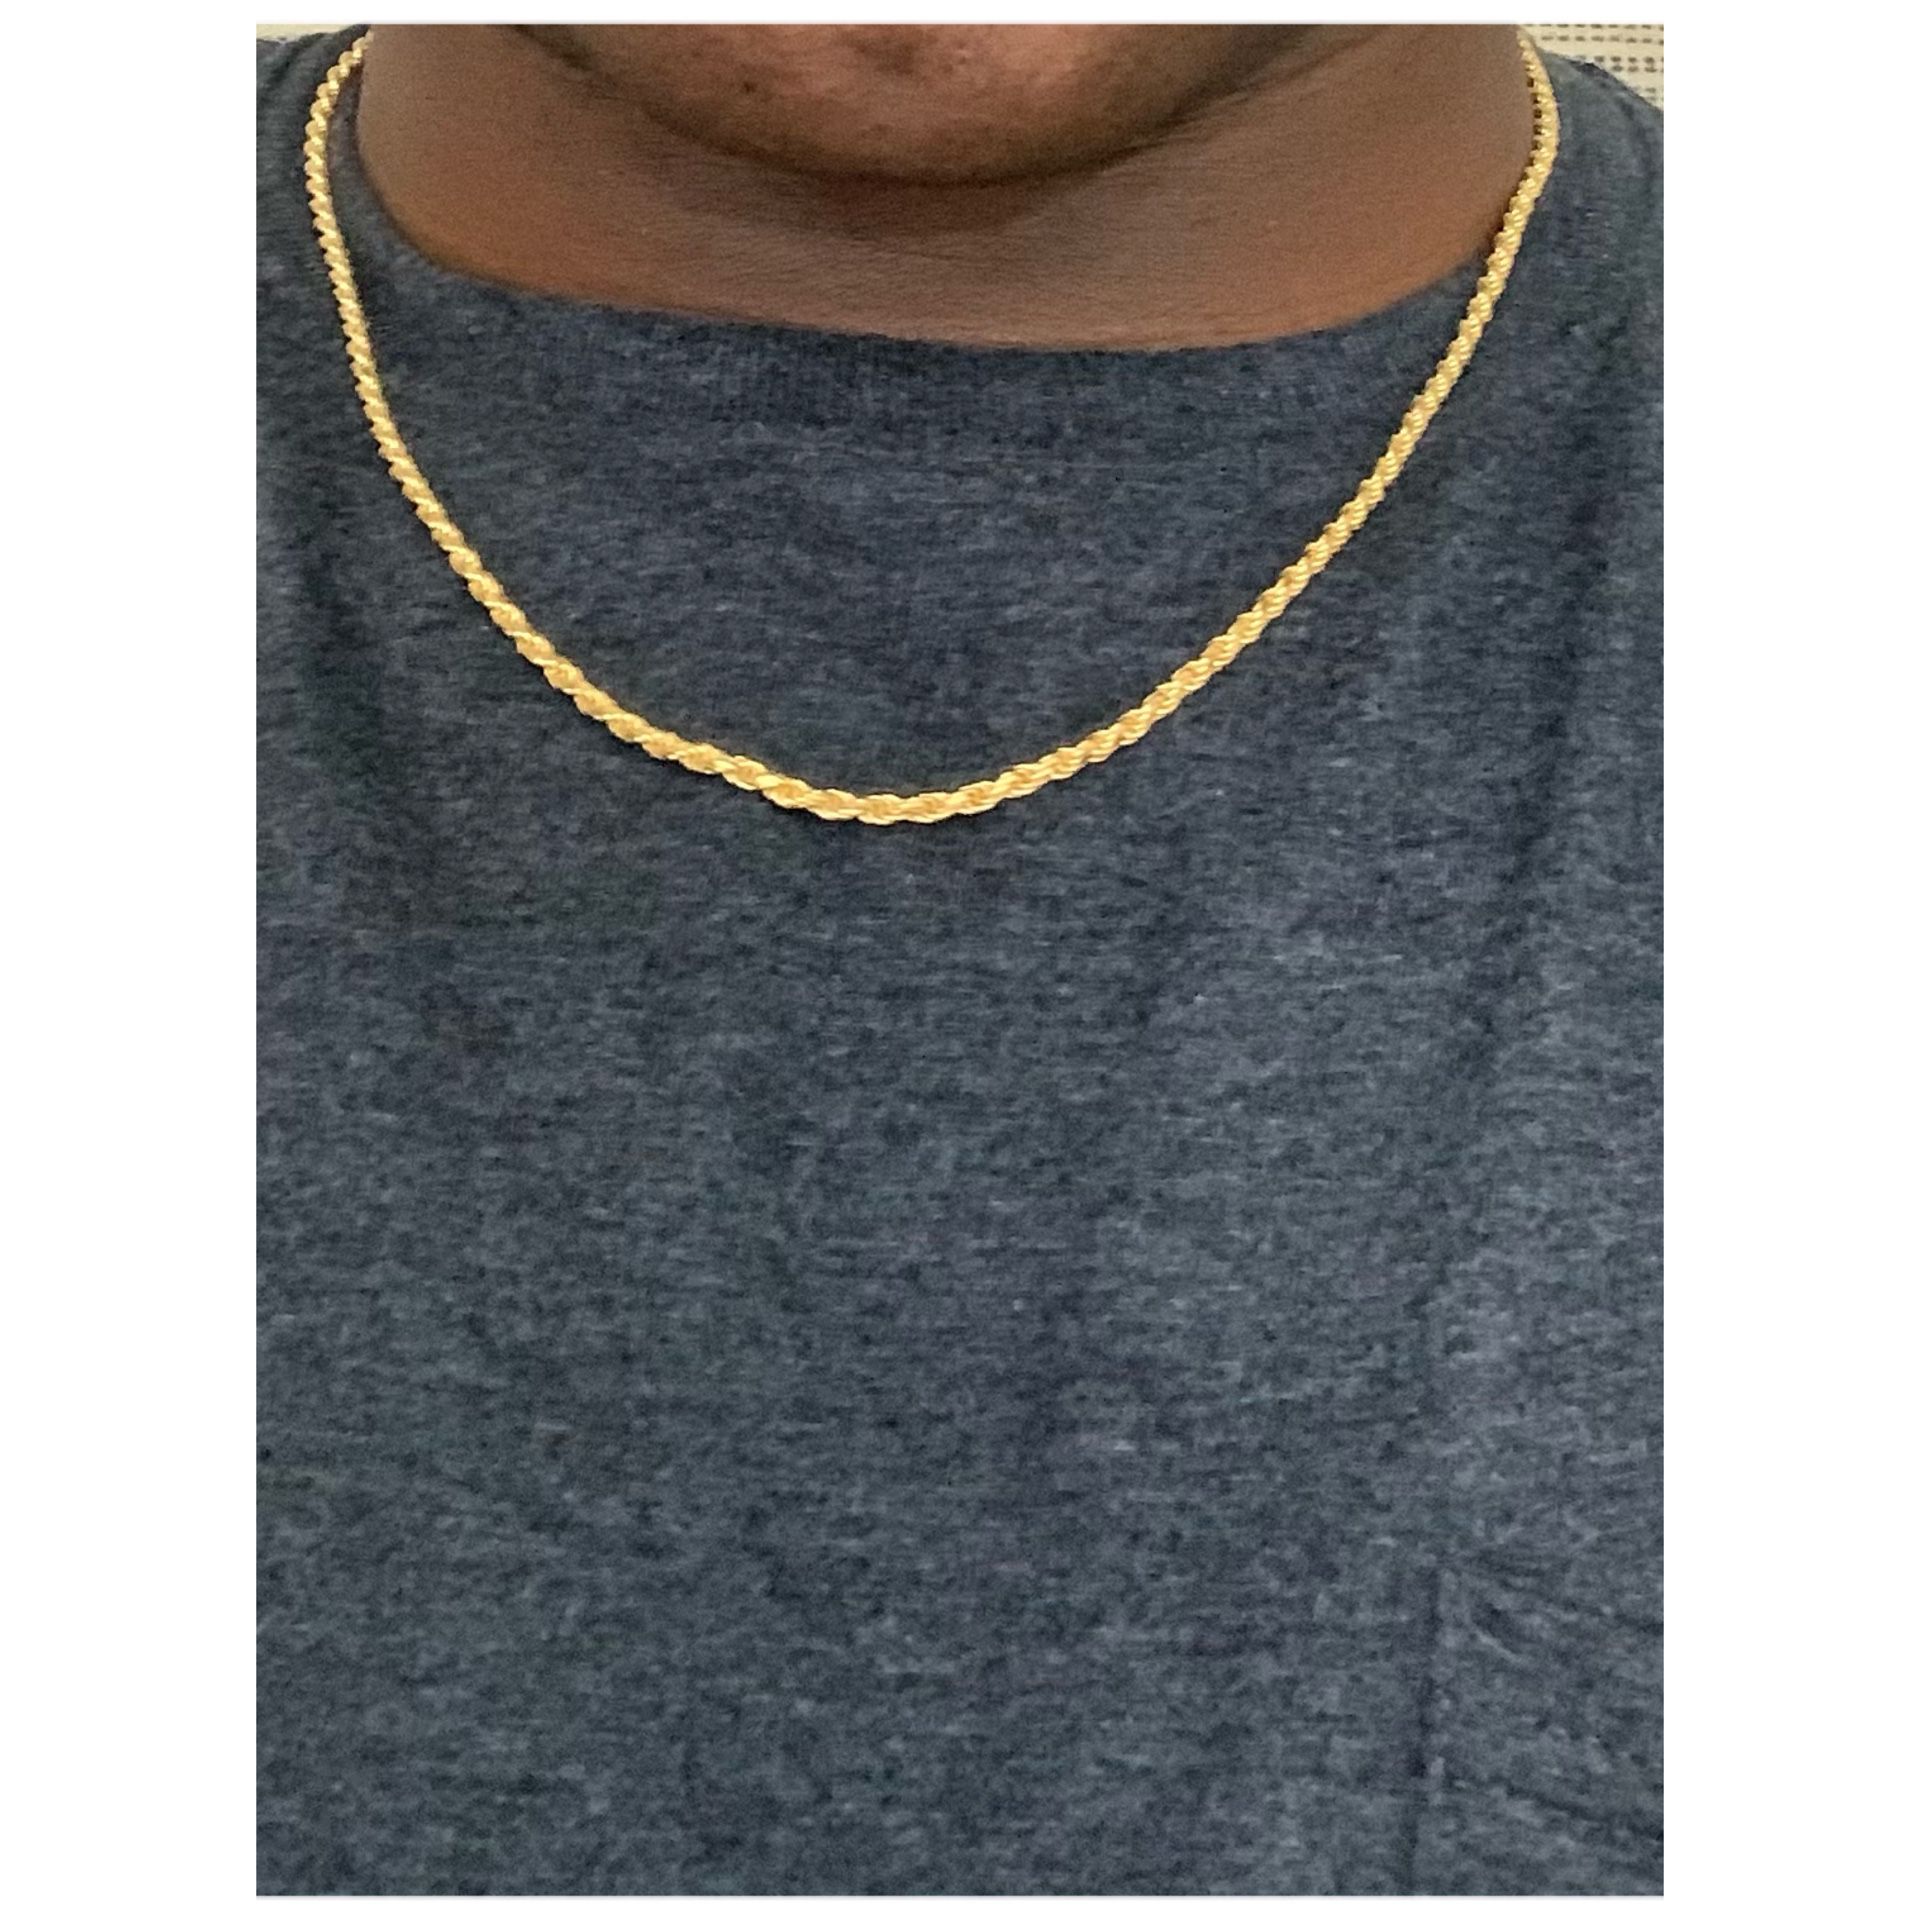 Brand New Gold Rope Chain, 20”